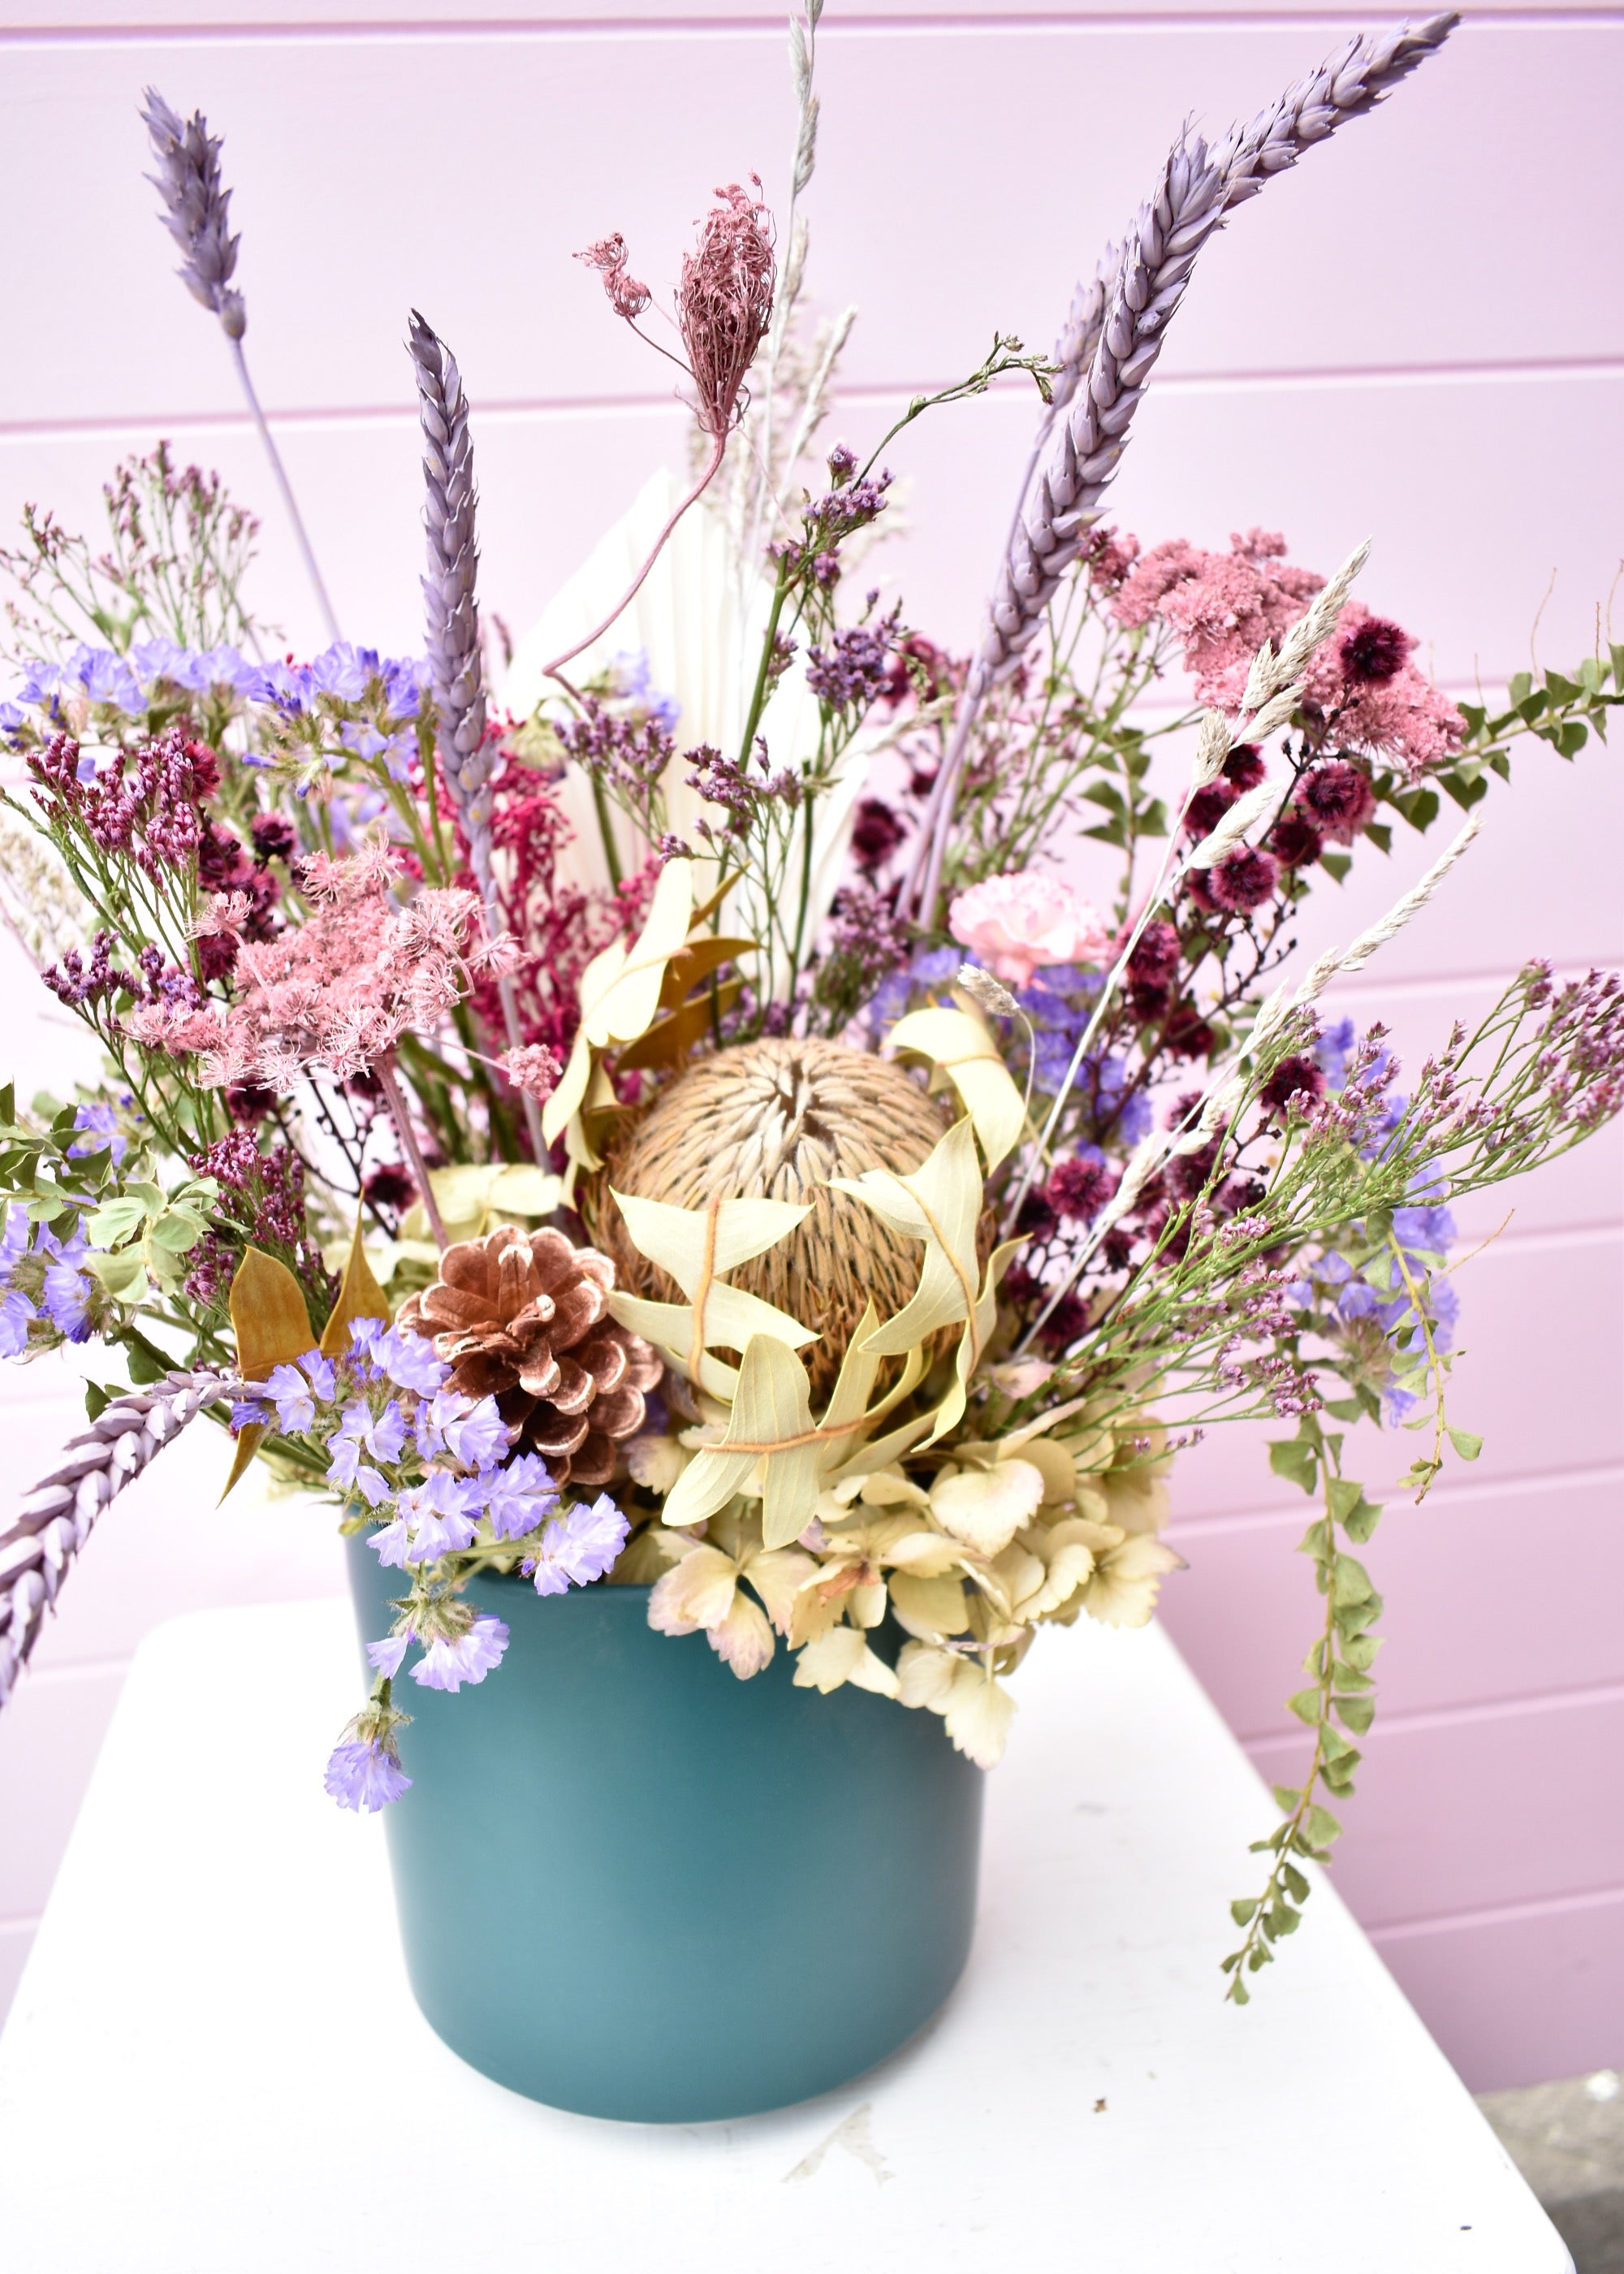 Pink background with a dried flower arrangement sitting on a white stool. A teal green ceramic pot with sage green, lilac, burgundy and lavender everlasting and dried flowers